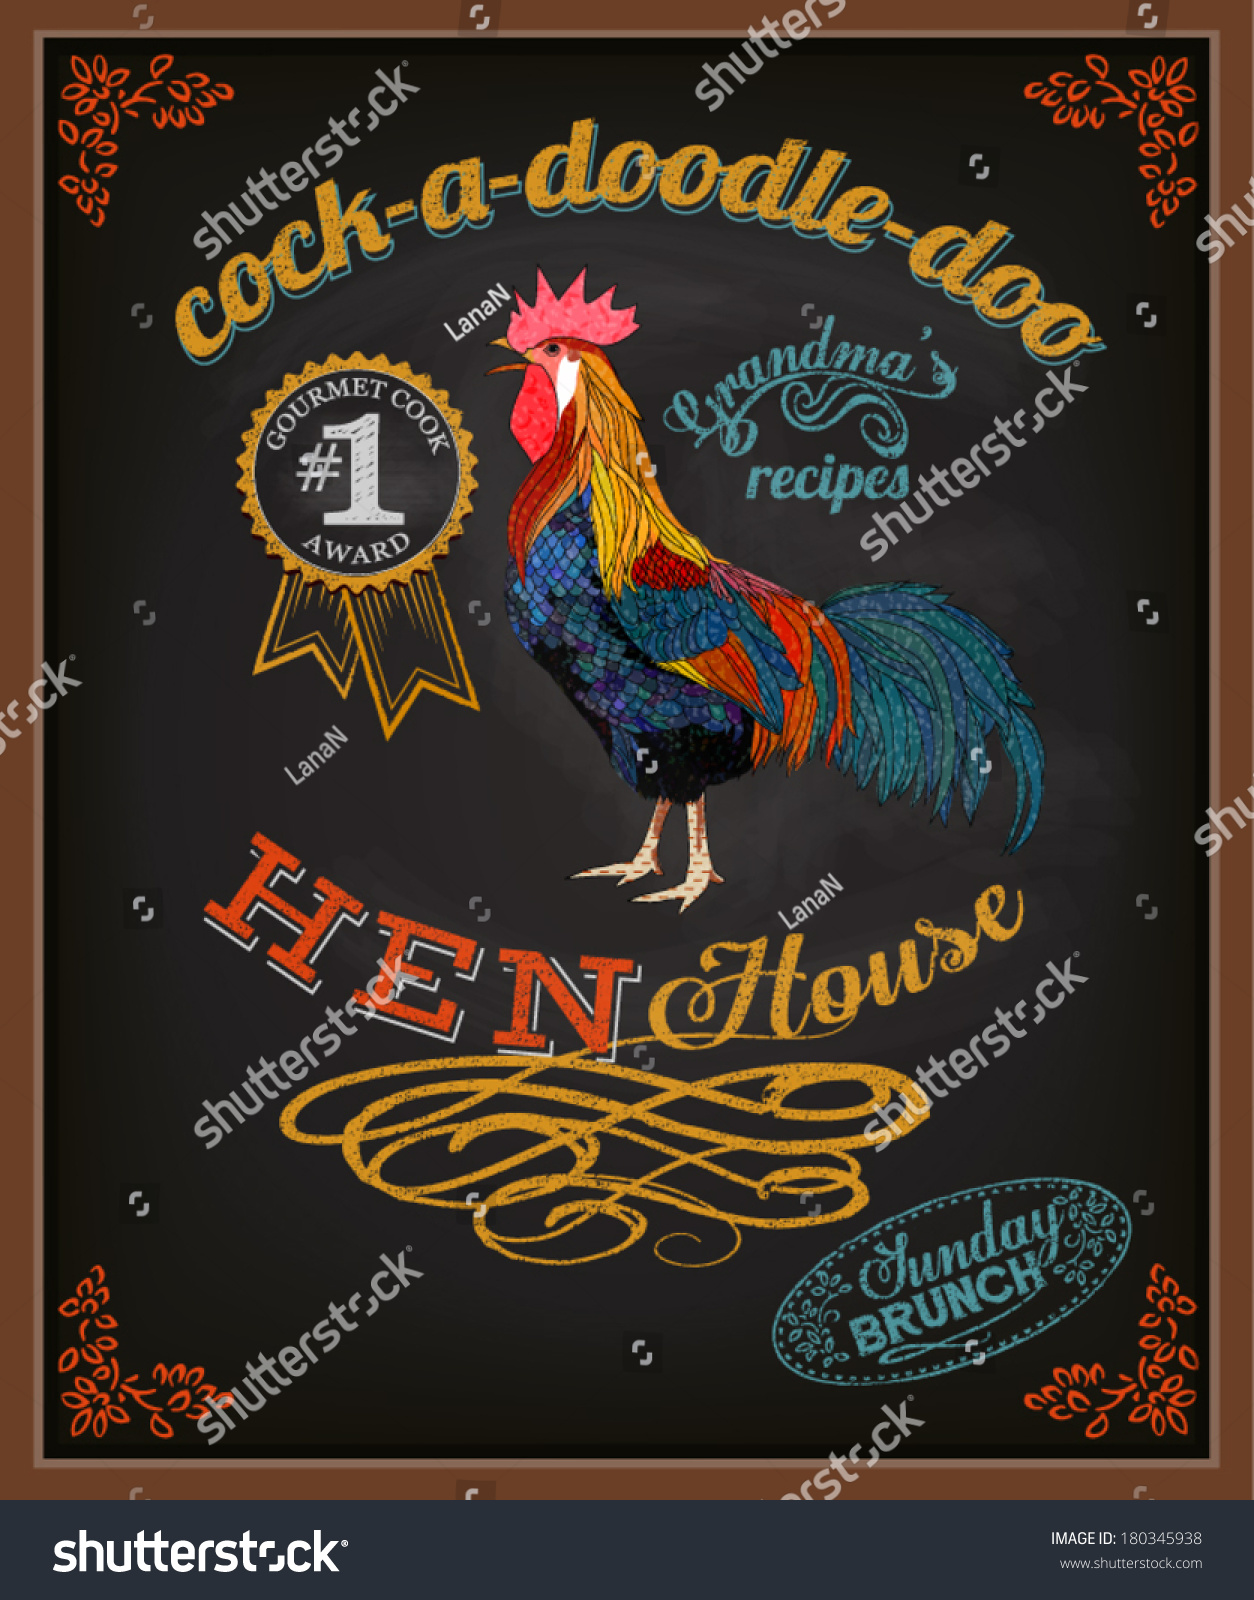 SVG of Chalkboard Poster for Chicken Restaurant - Colorful blackboard advertisement for restaurant with rooster, swirls, branches and specials - hand drawn, chalks, vintage style marketing svg